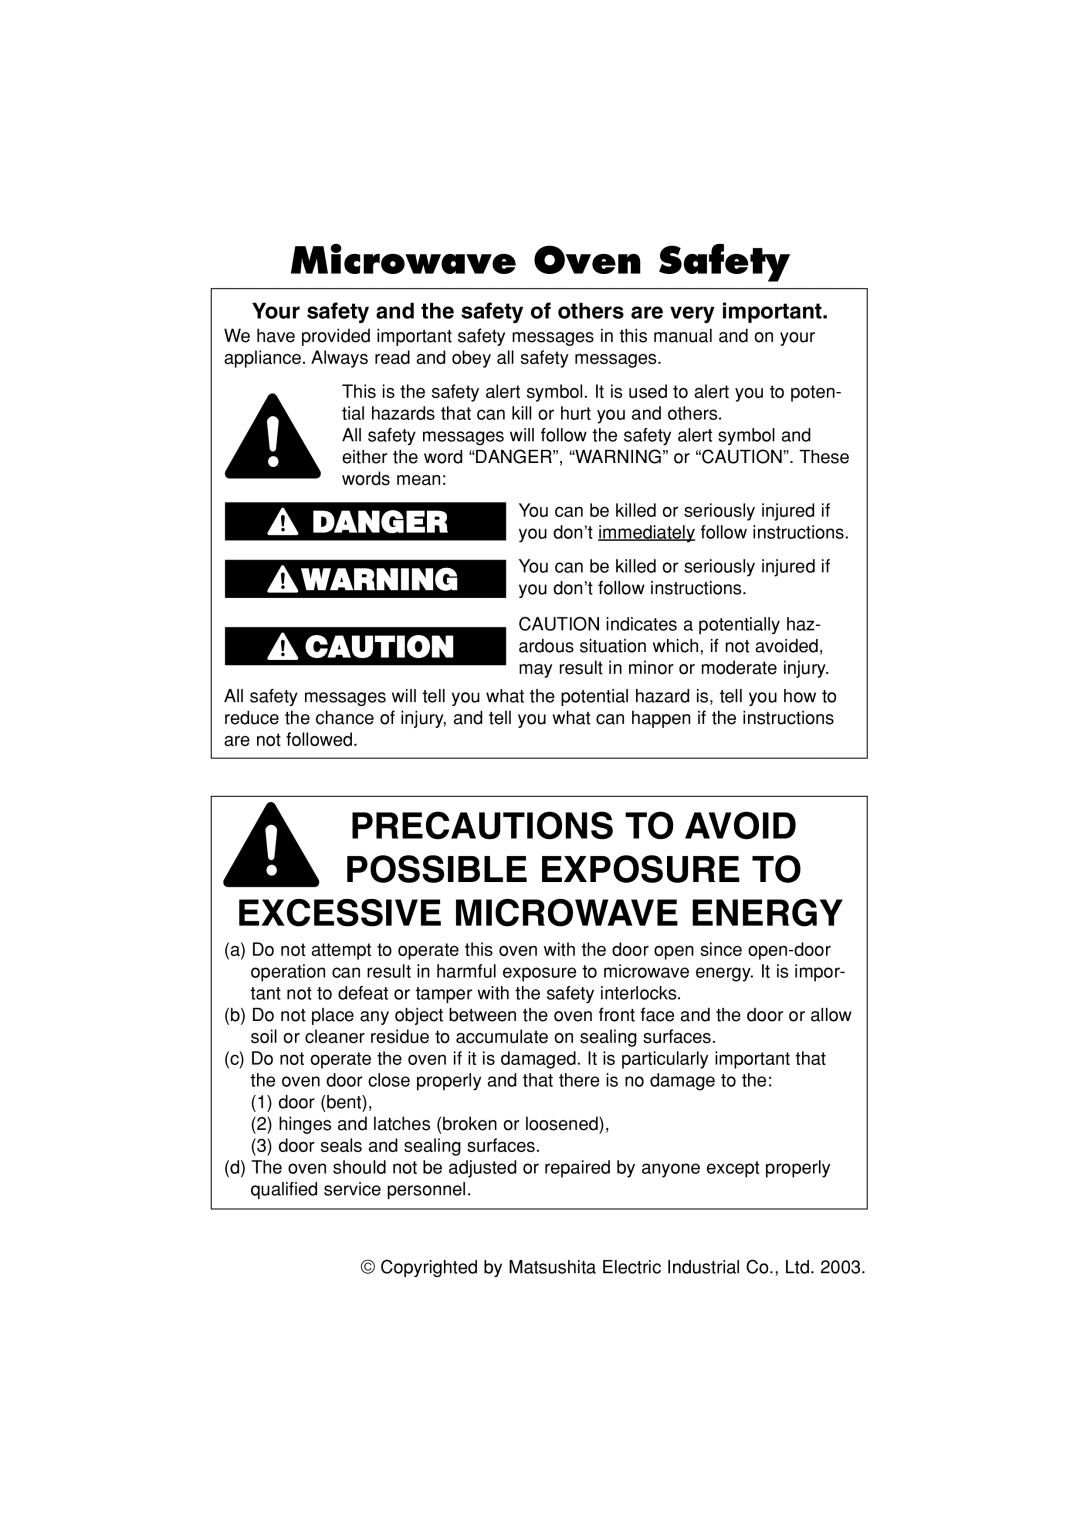 Panasonic NN-S963 Excessive Microwave Energy, Precautions To Avoid Possible Exposure To, Microwave Oven Safety, Danger 